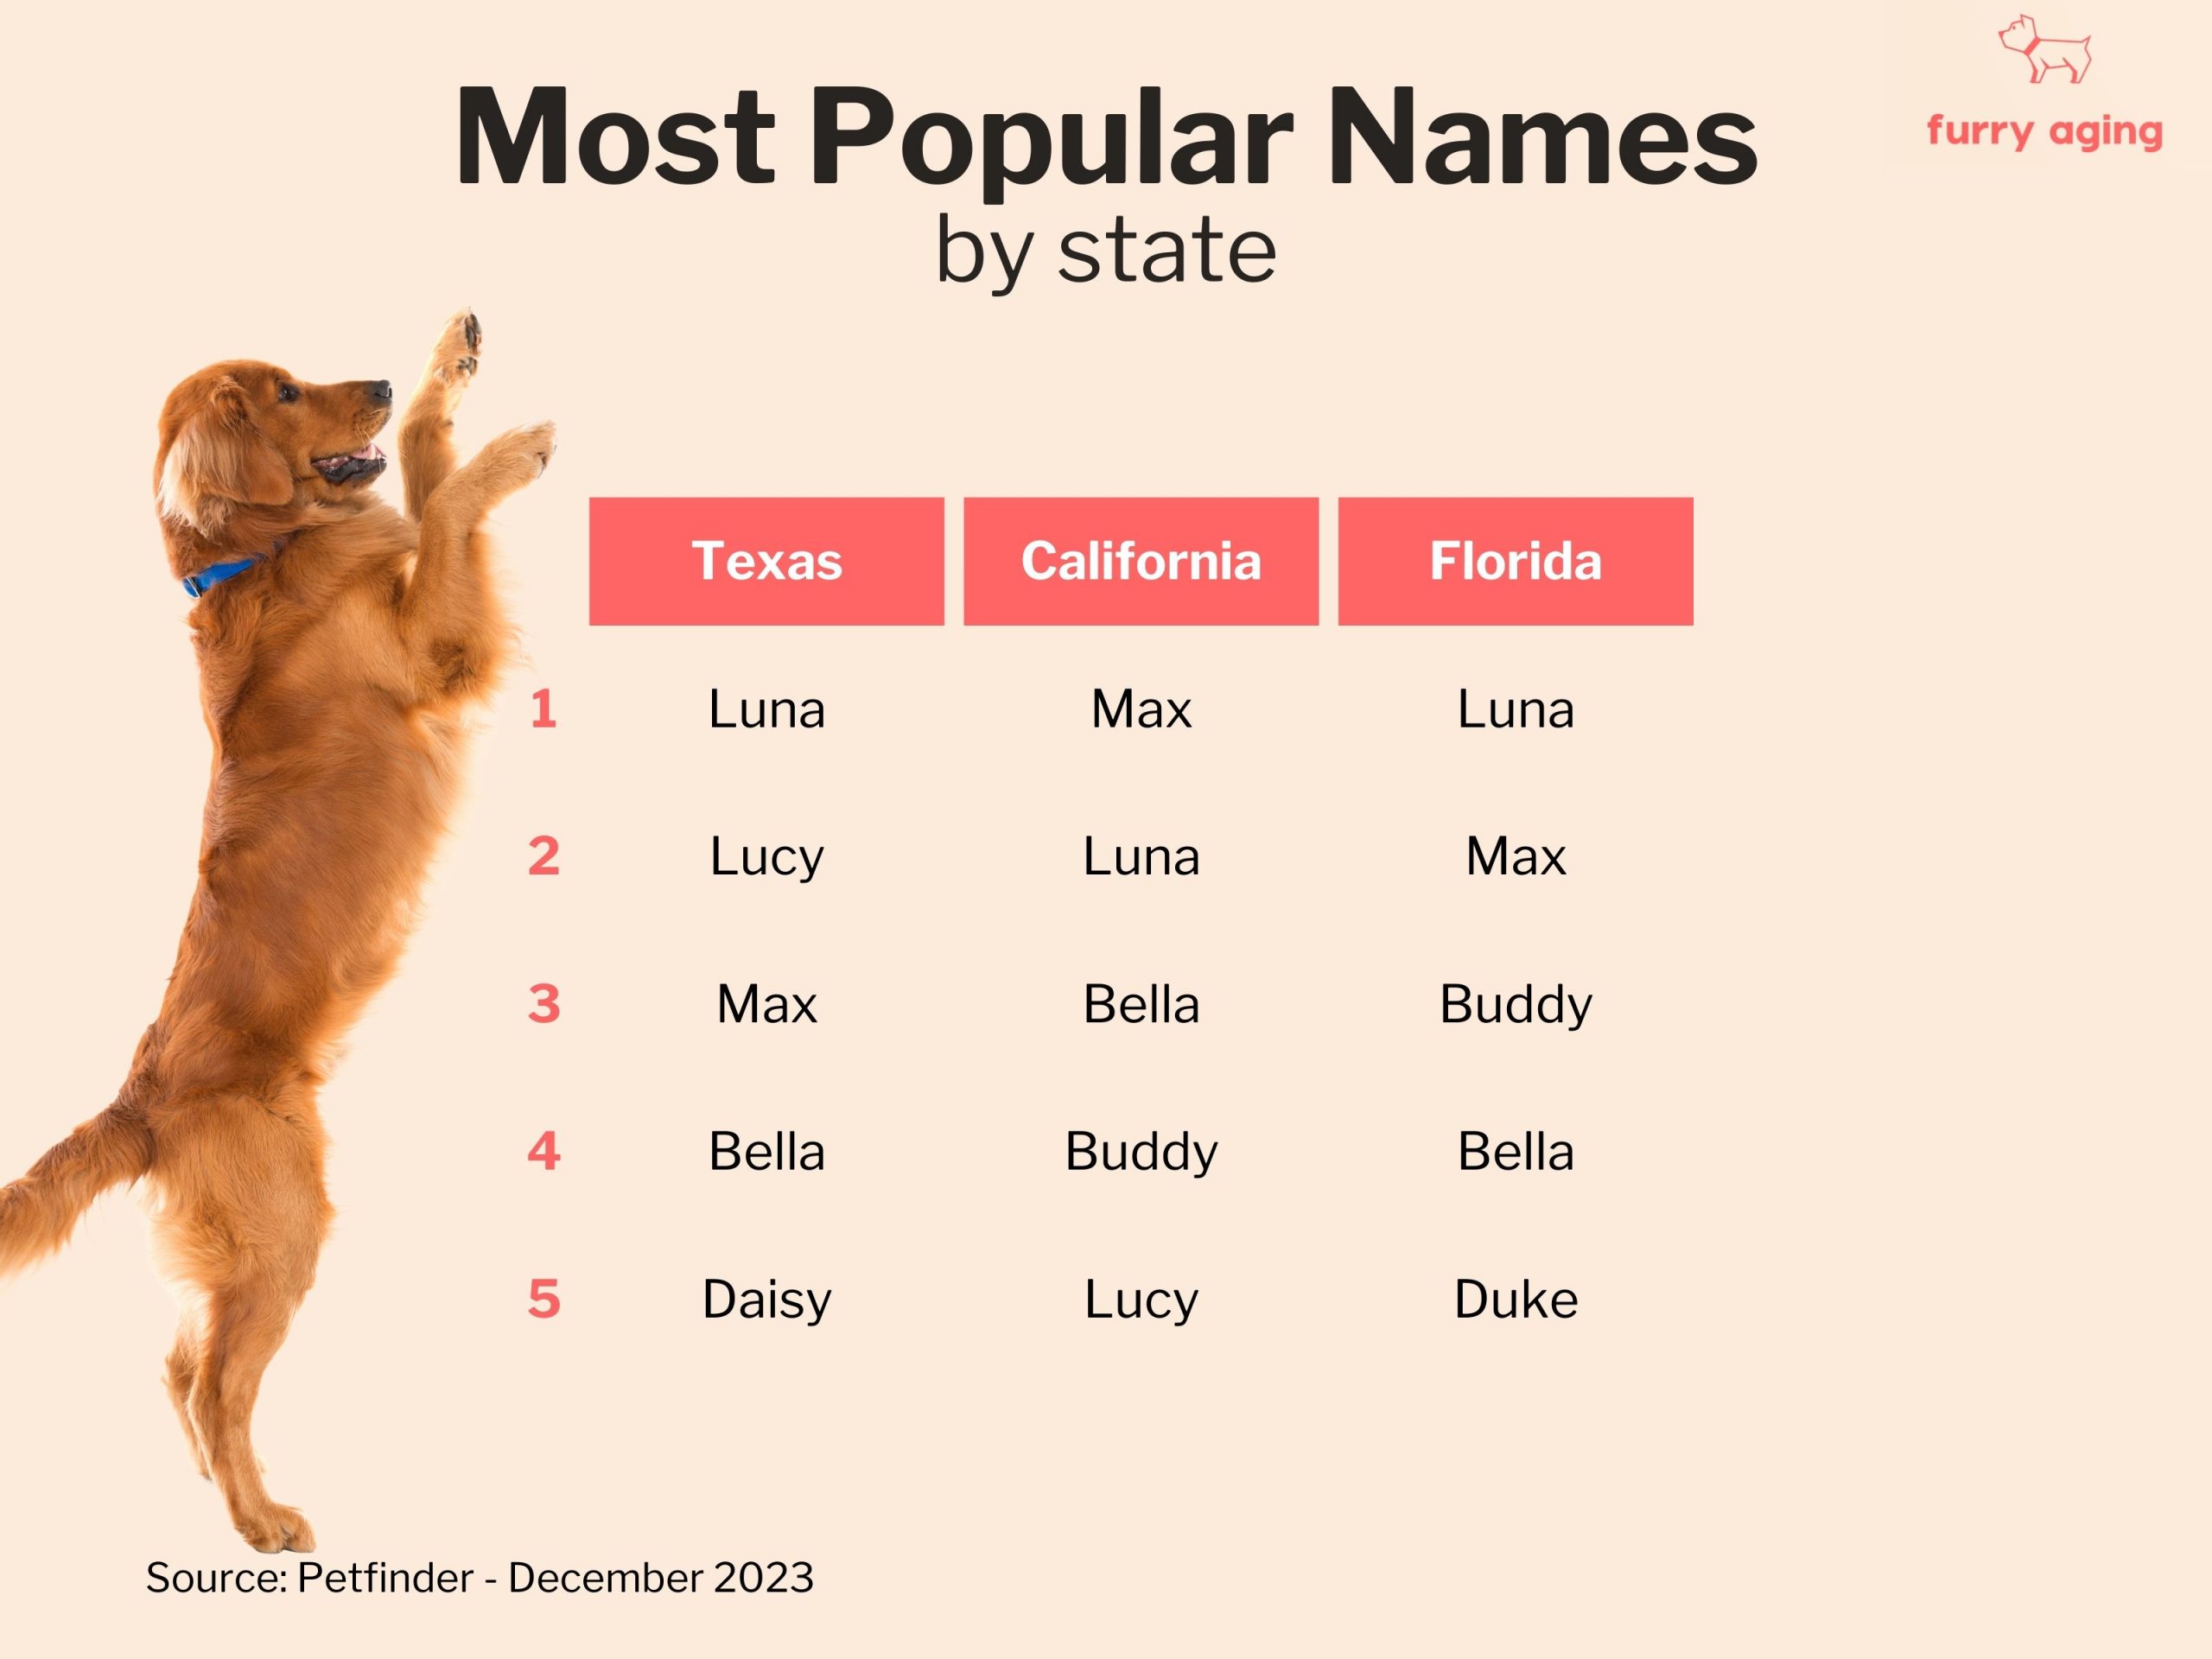 Most popular names by state